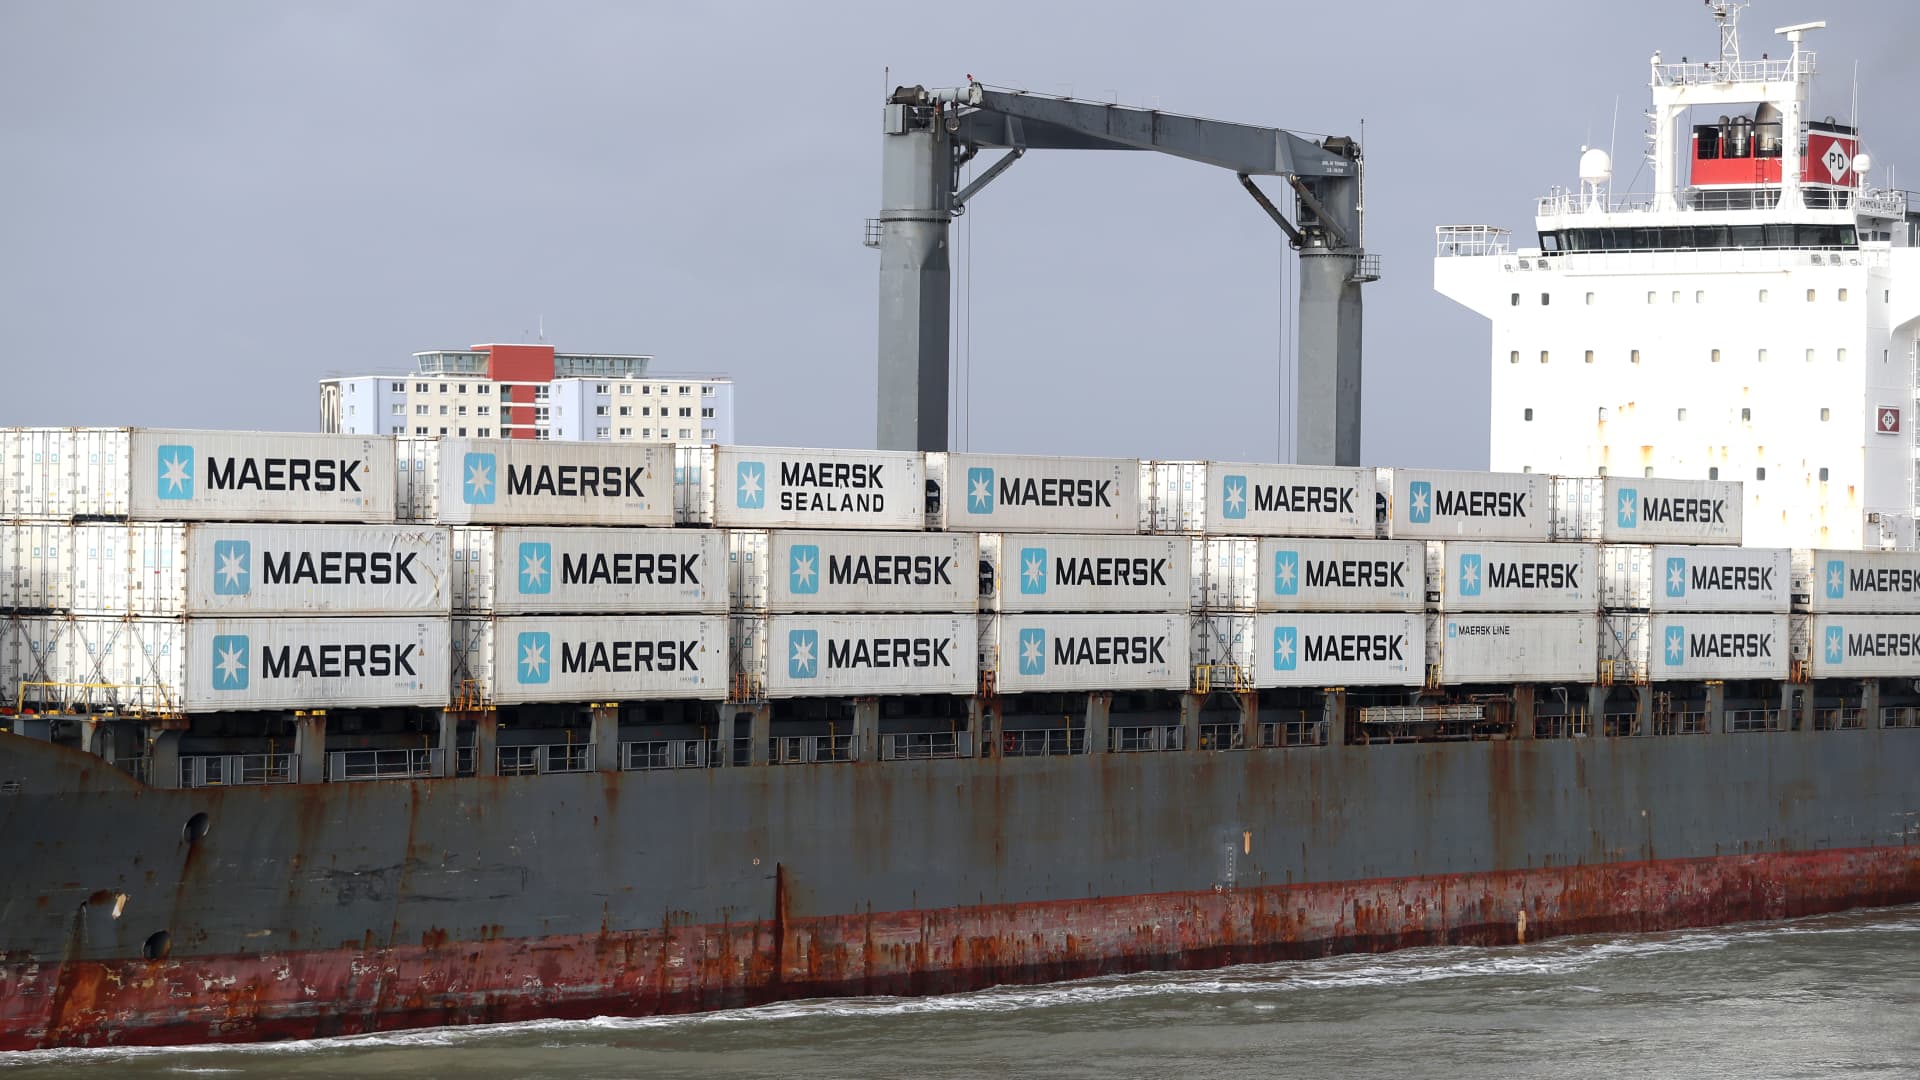 Shipping company Maersk, a barometer for trade, warns of ‘dark clouds on the horizon’